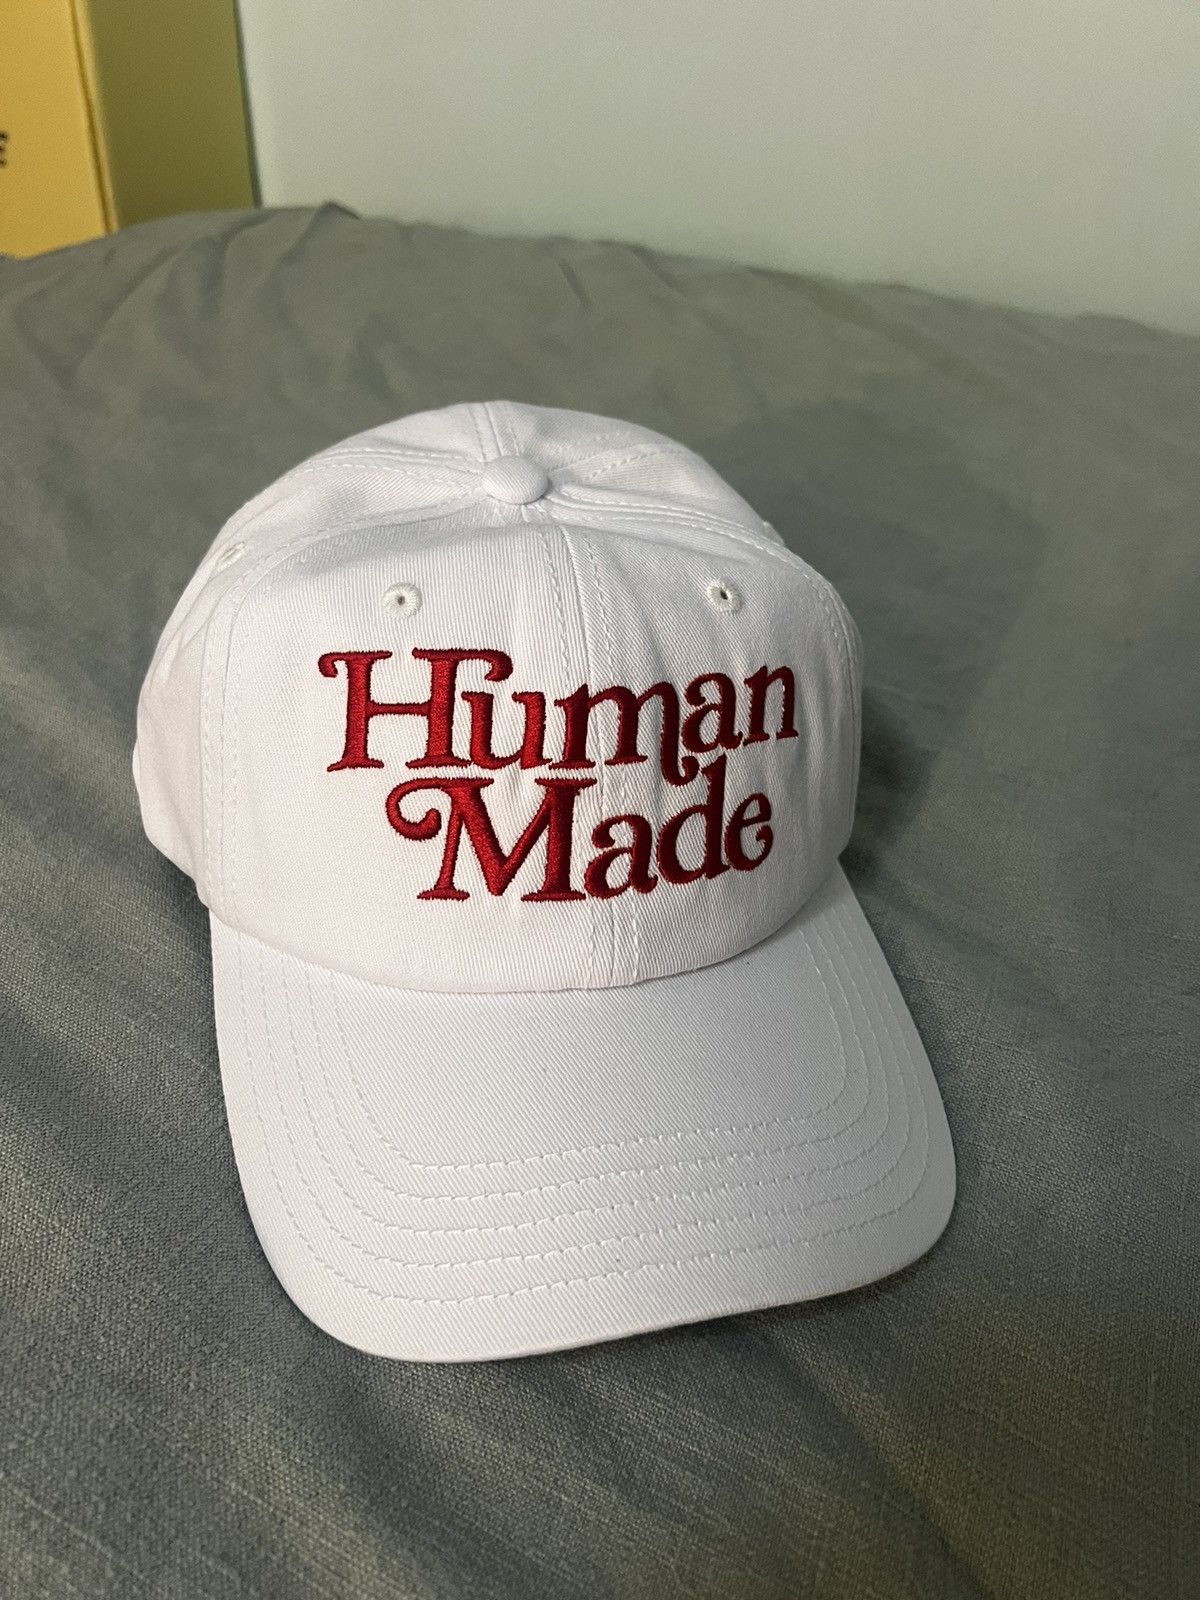 Human Made Girls Don't Cry x Human Made 6-Panel Hat | Grailed